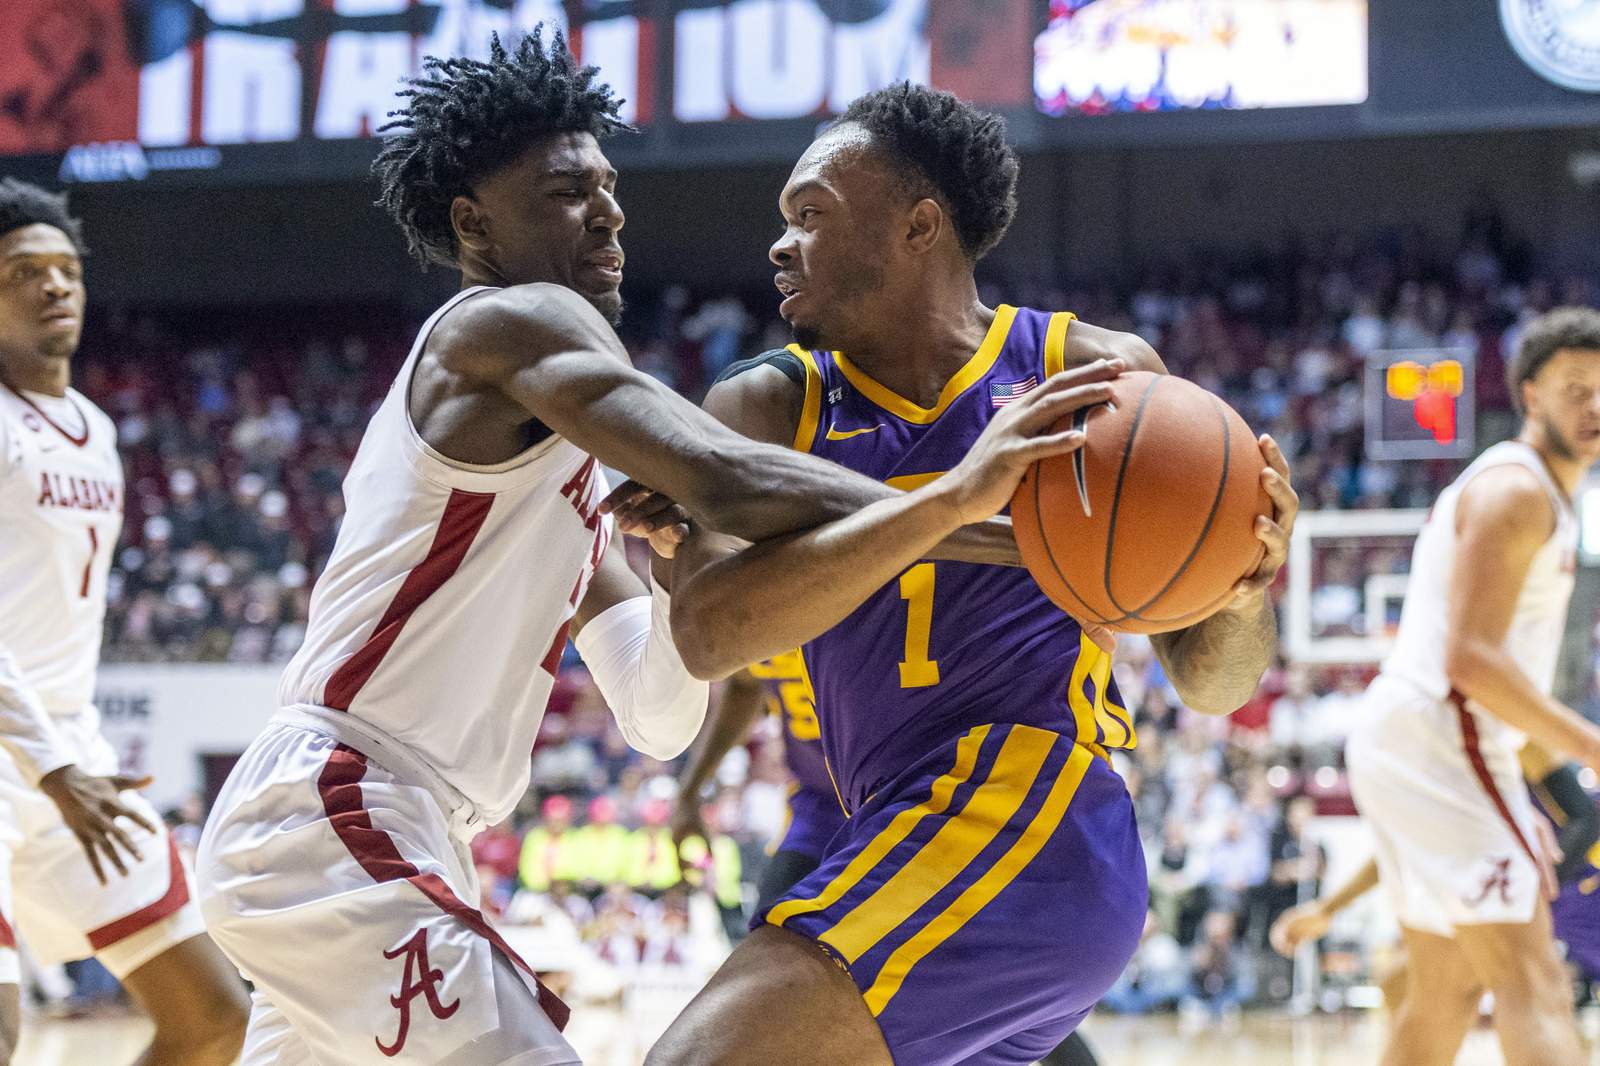 Smart leads LSU past Sam Houston State without coach Wade